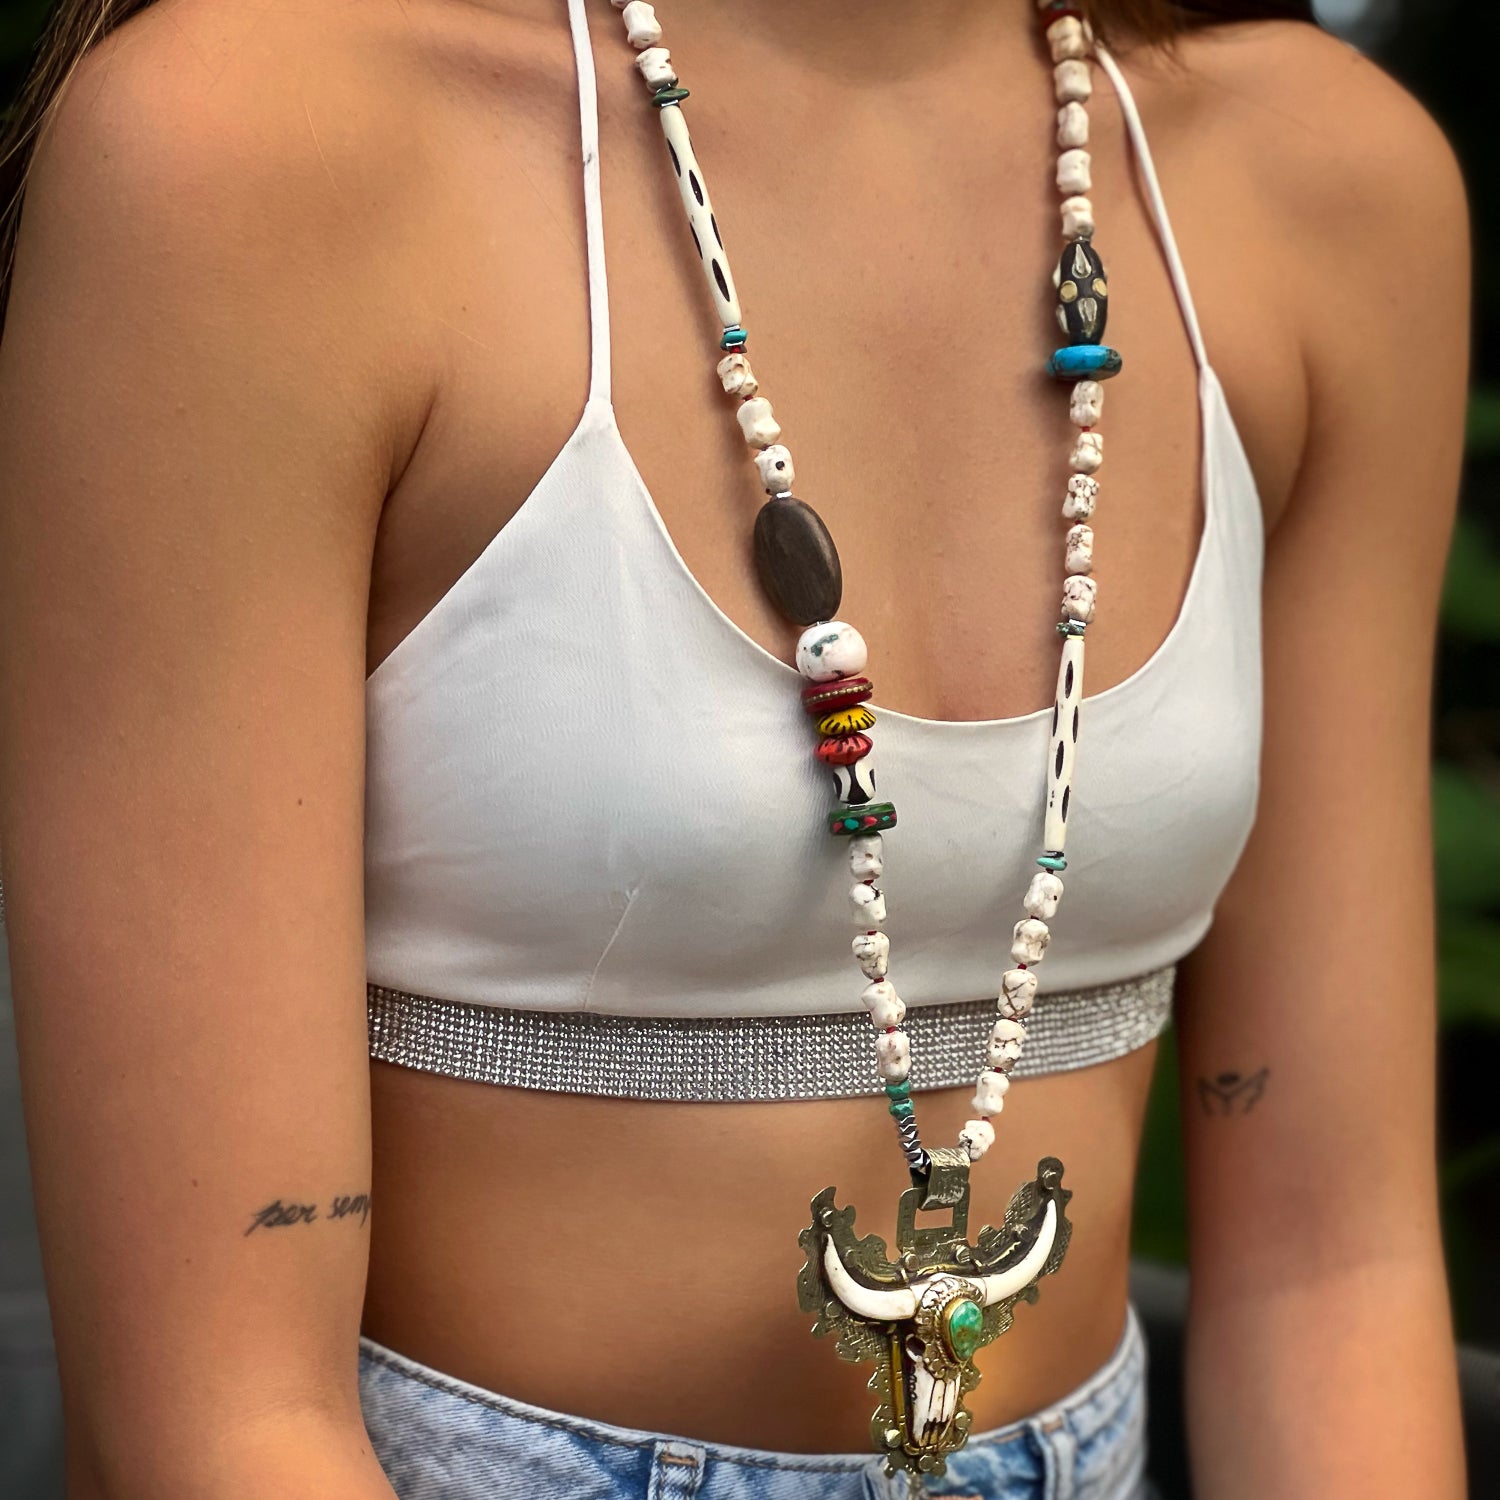 The model wears the Mystic Longhorn Unique Necklace, showcasing its striking design and the powerful symbolism of the longhorn pendant, making a bold statement and capturing attention.